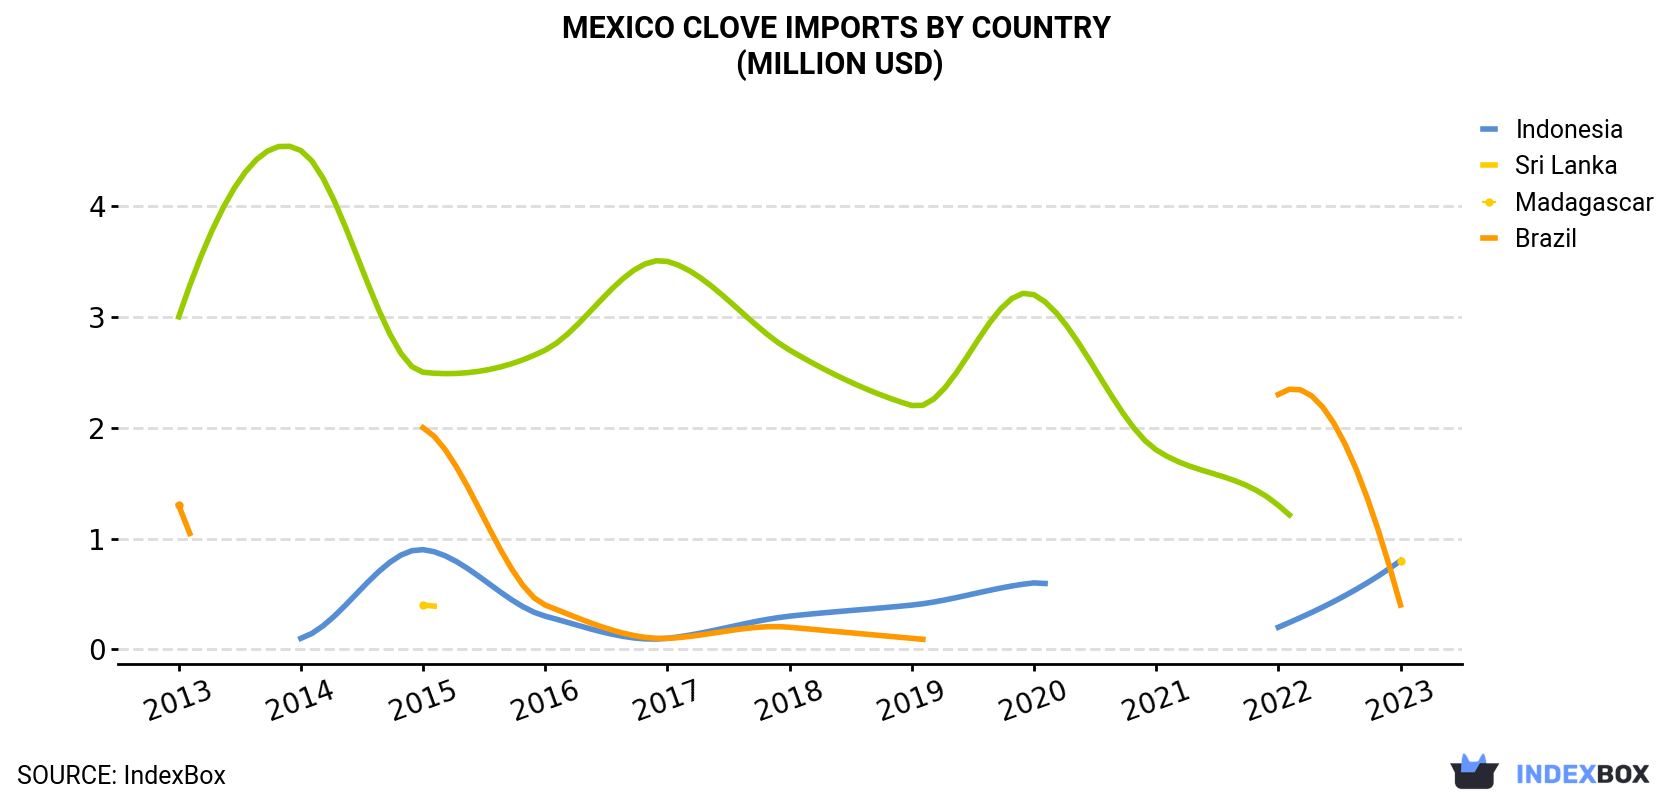 Mexico Clove Imports By Country (Million USD)